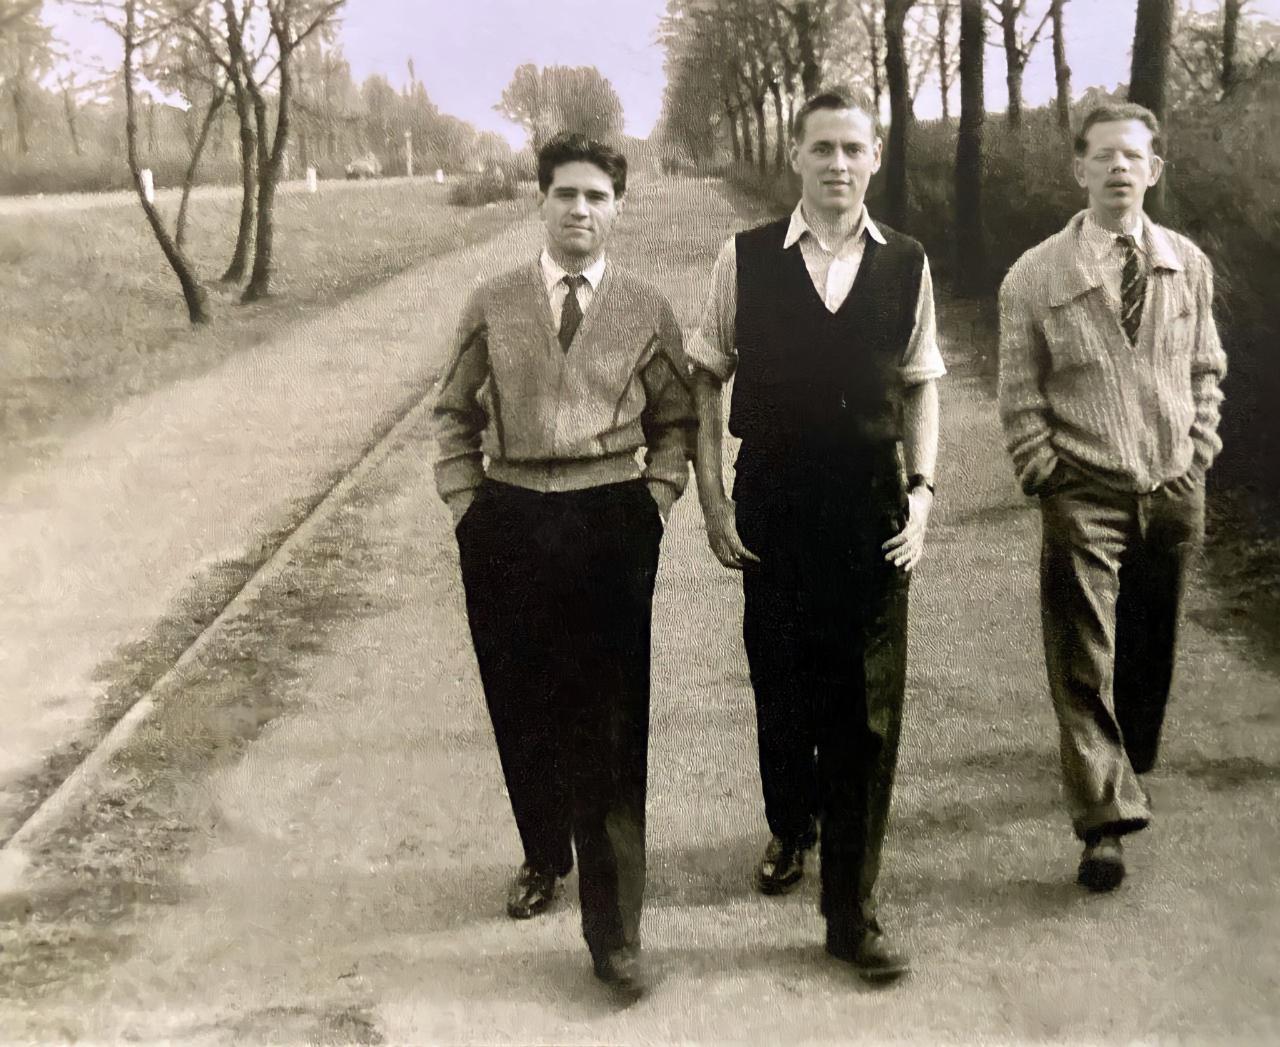 My great uncle (left) and 2 friends, 1950s, UK.jpg